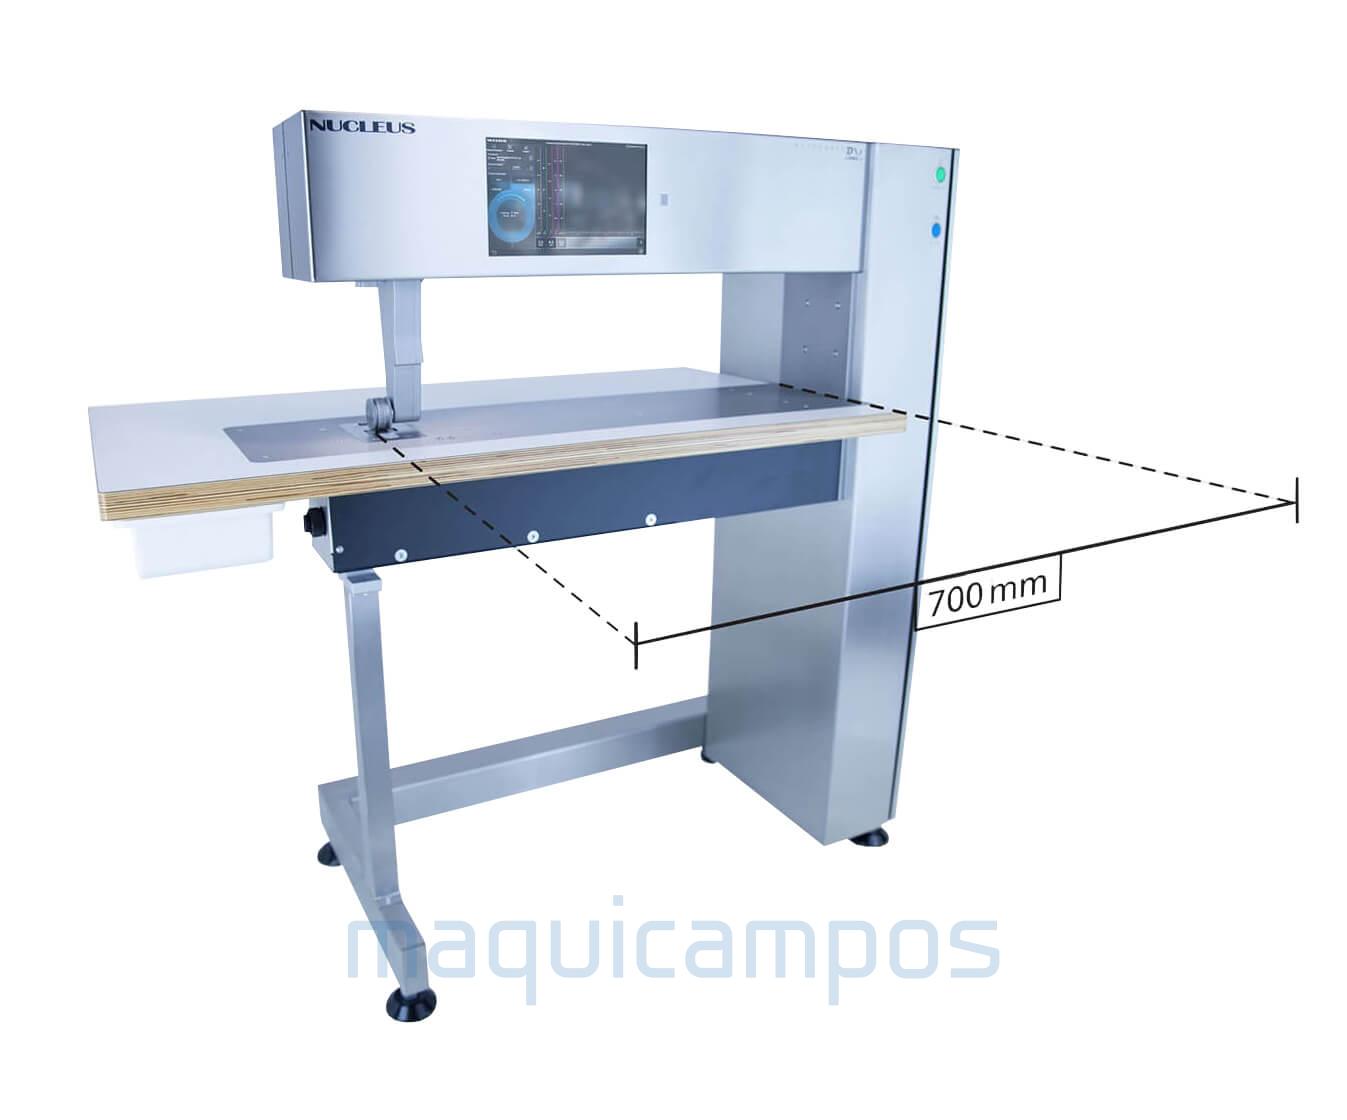 NUCLEUS Rotosonic DX1 TL12 Ultrasonic Welding Machine (Flat-Bed and Long Arm)